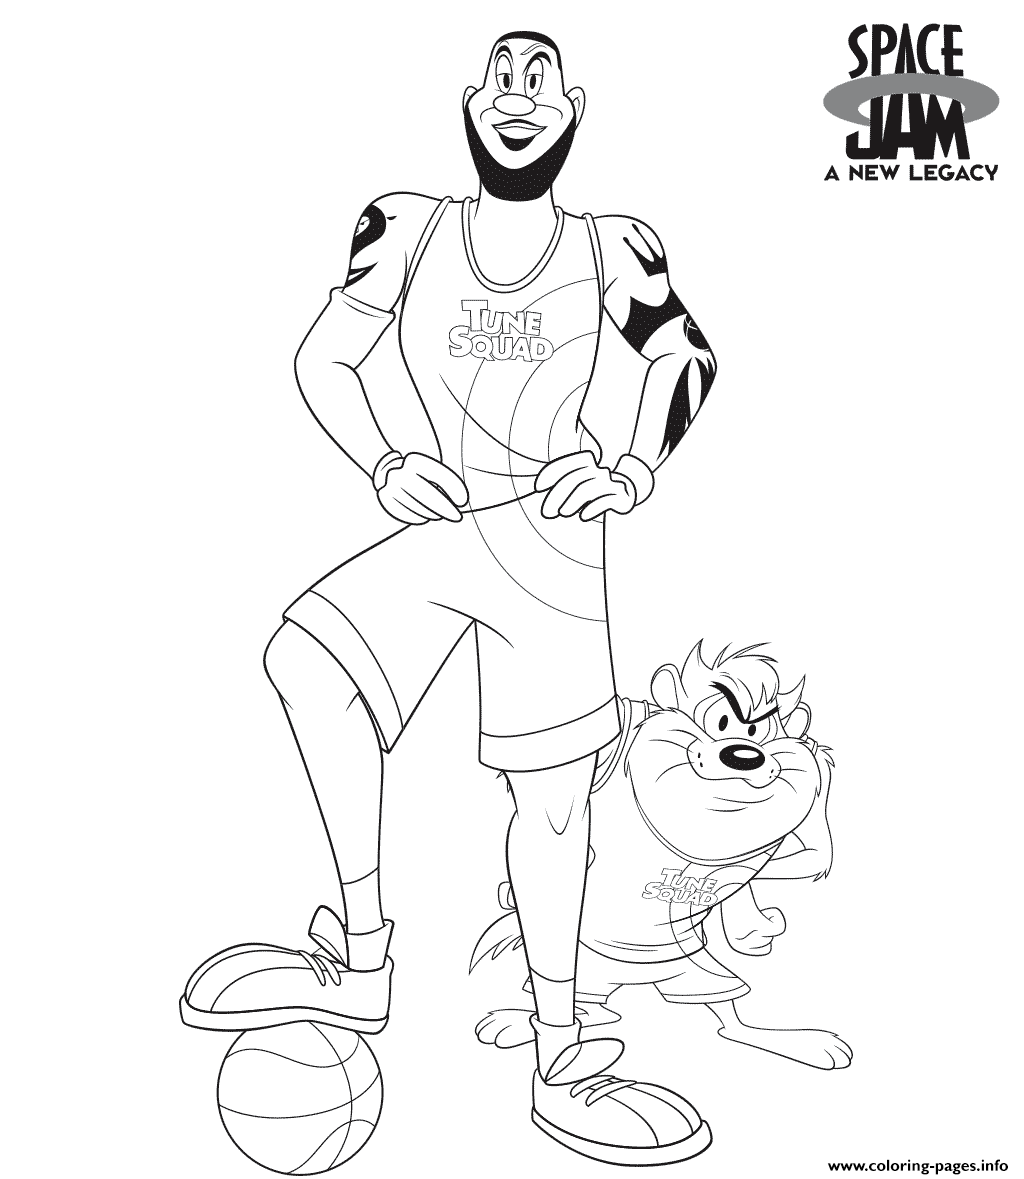 Space jam coloring page printable